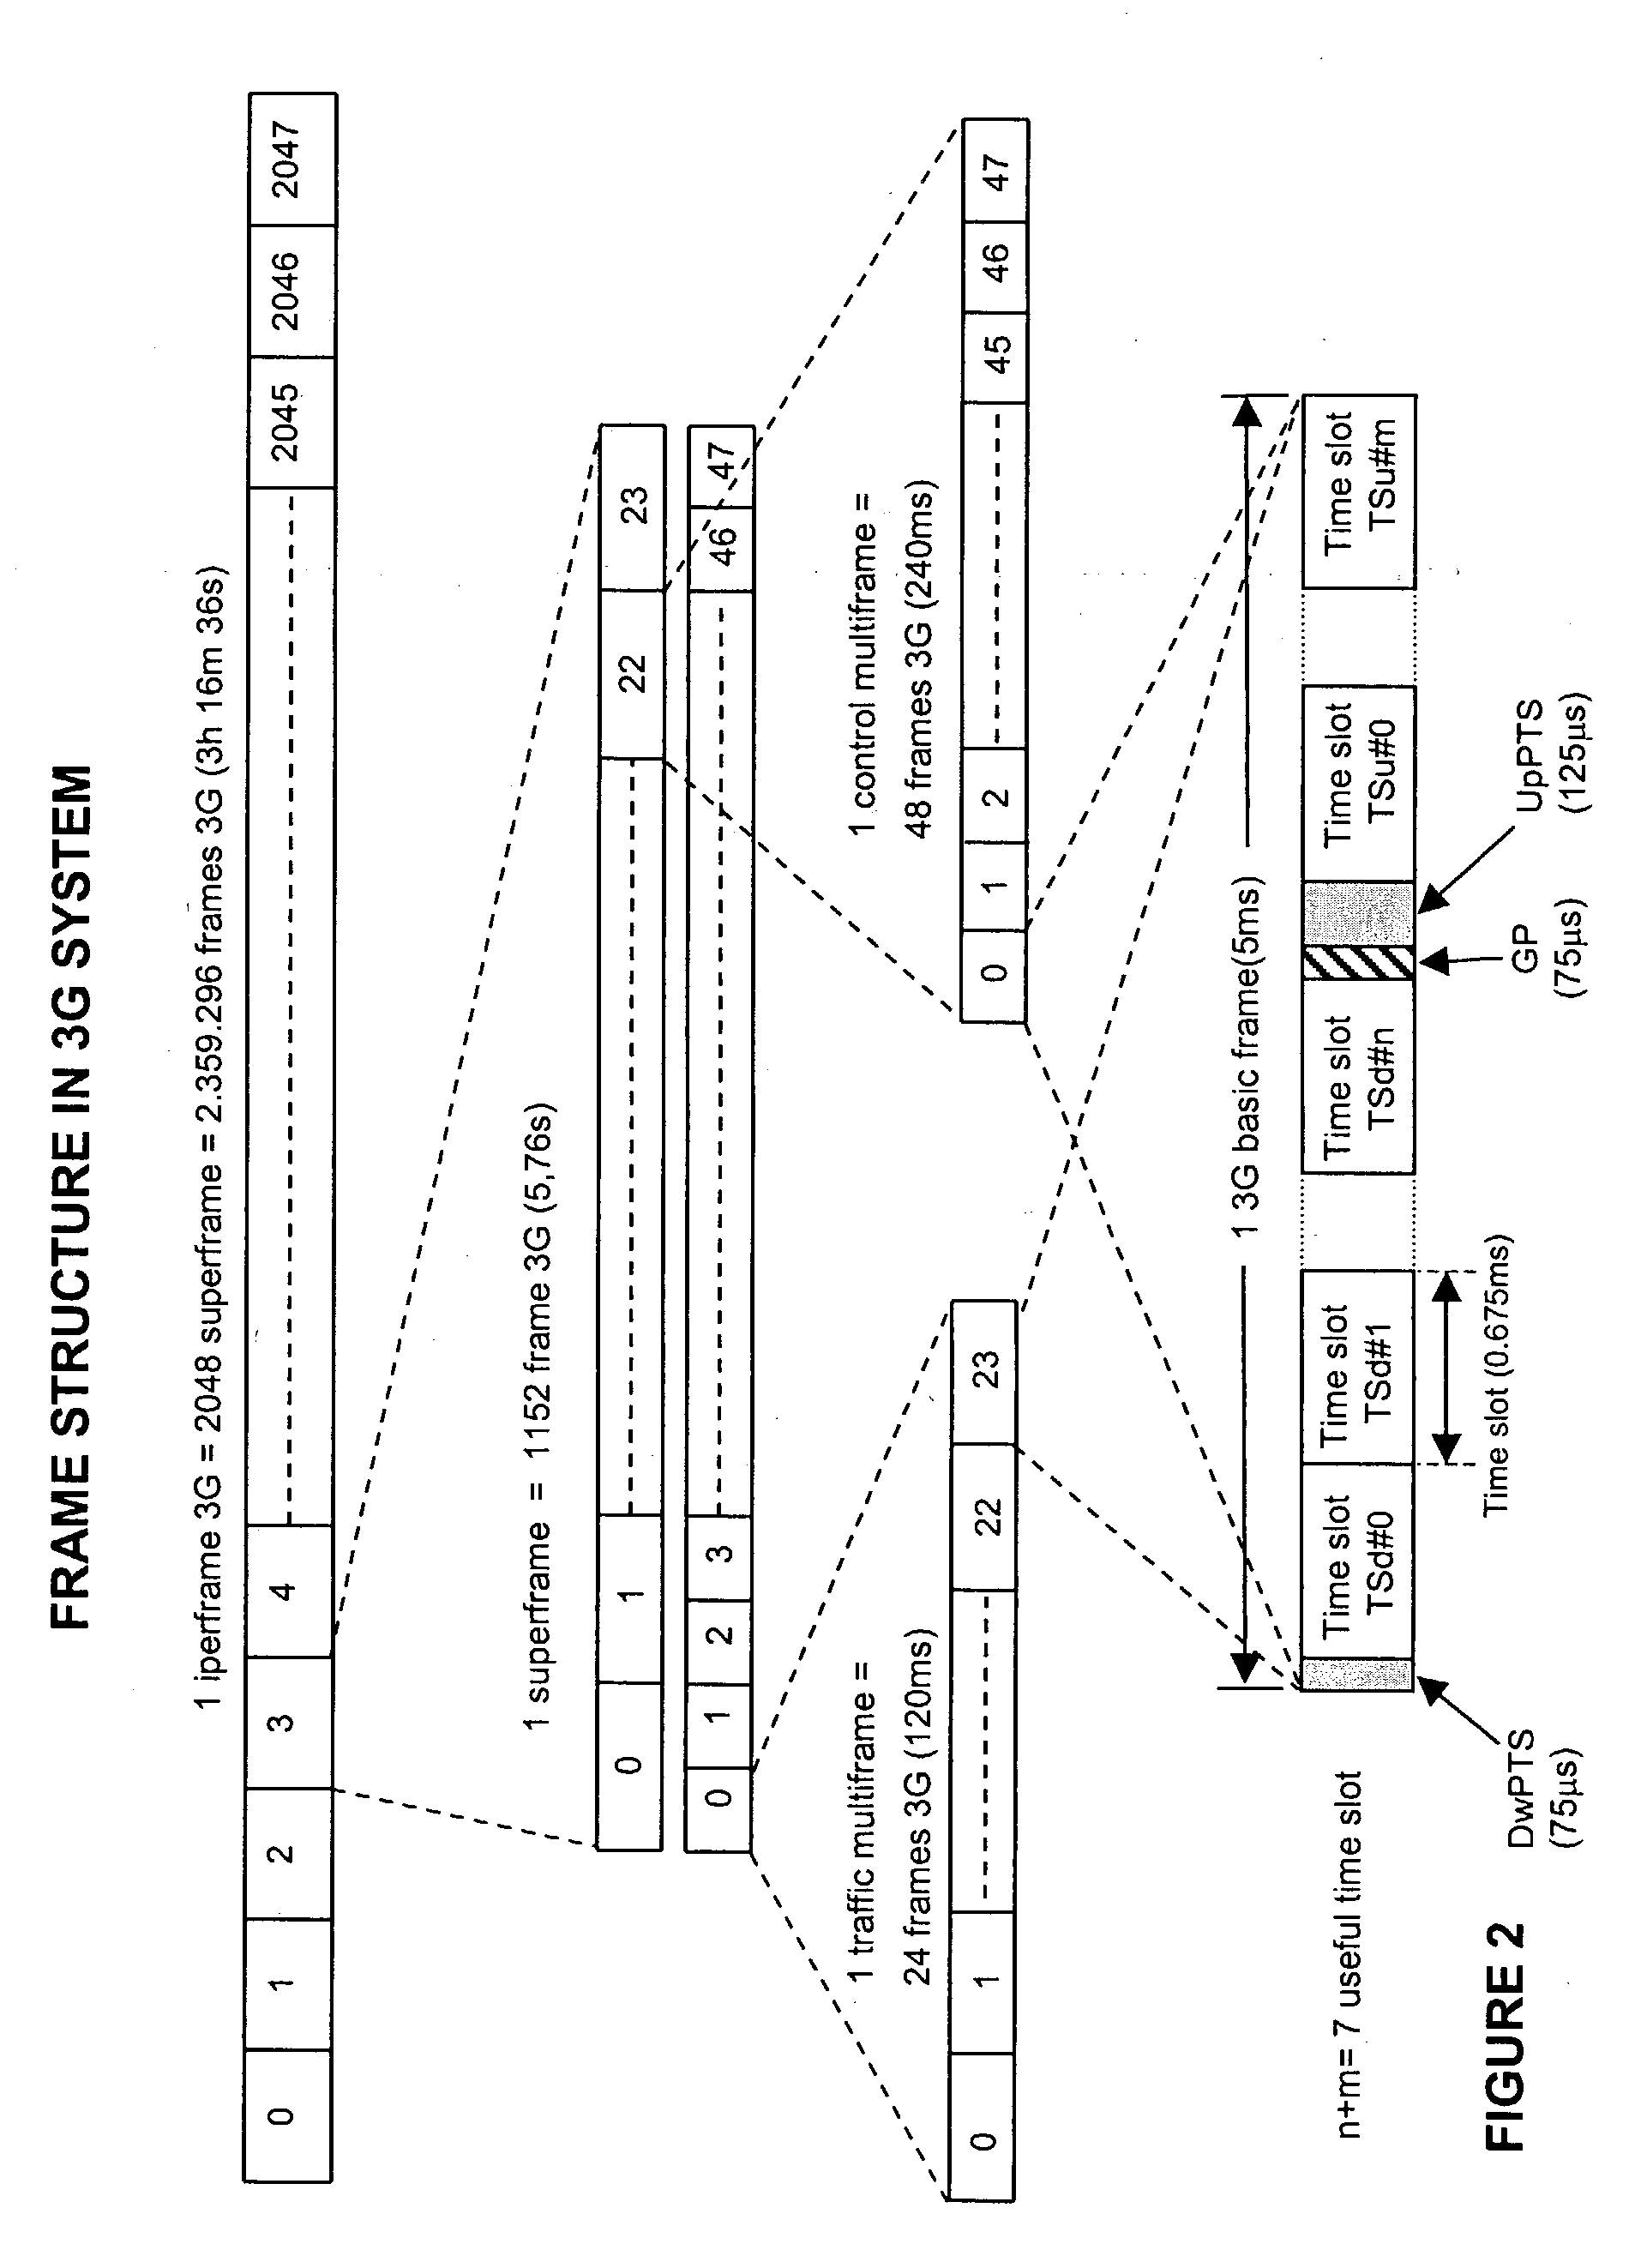 Method for optimizing the random access procedures in the cdma cellular networks